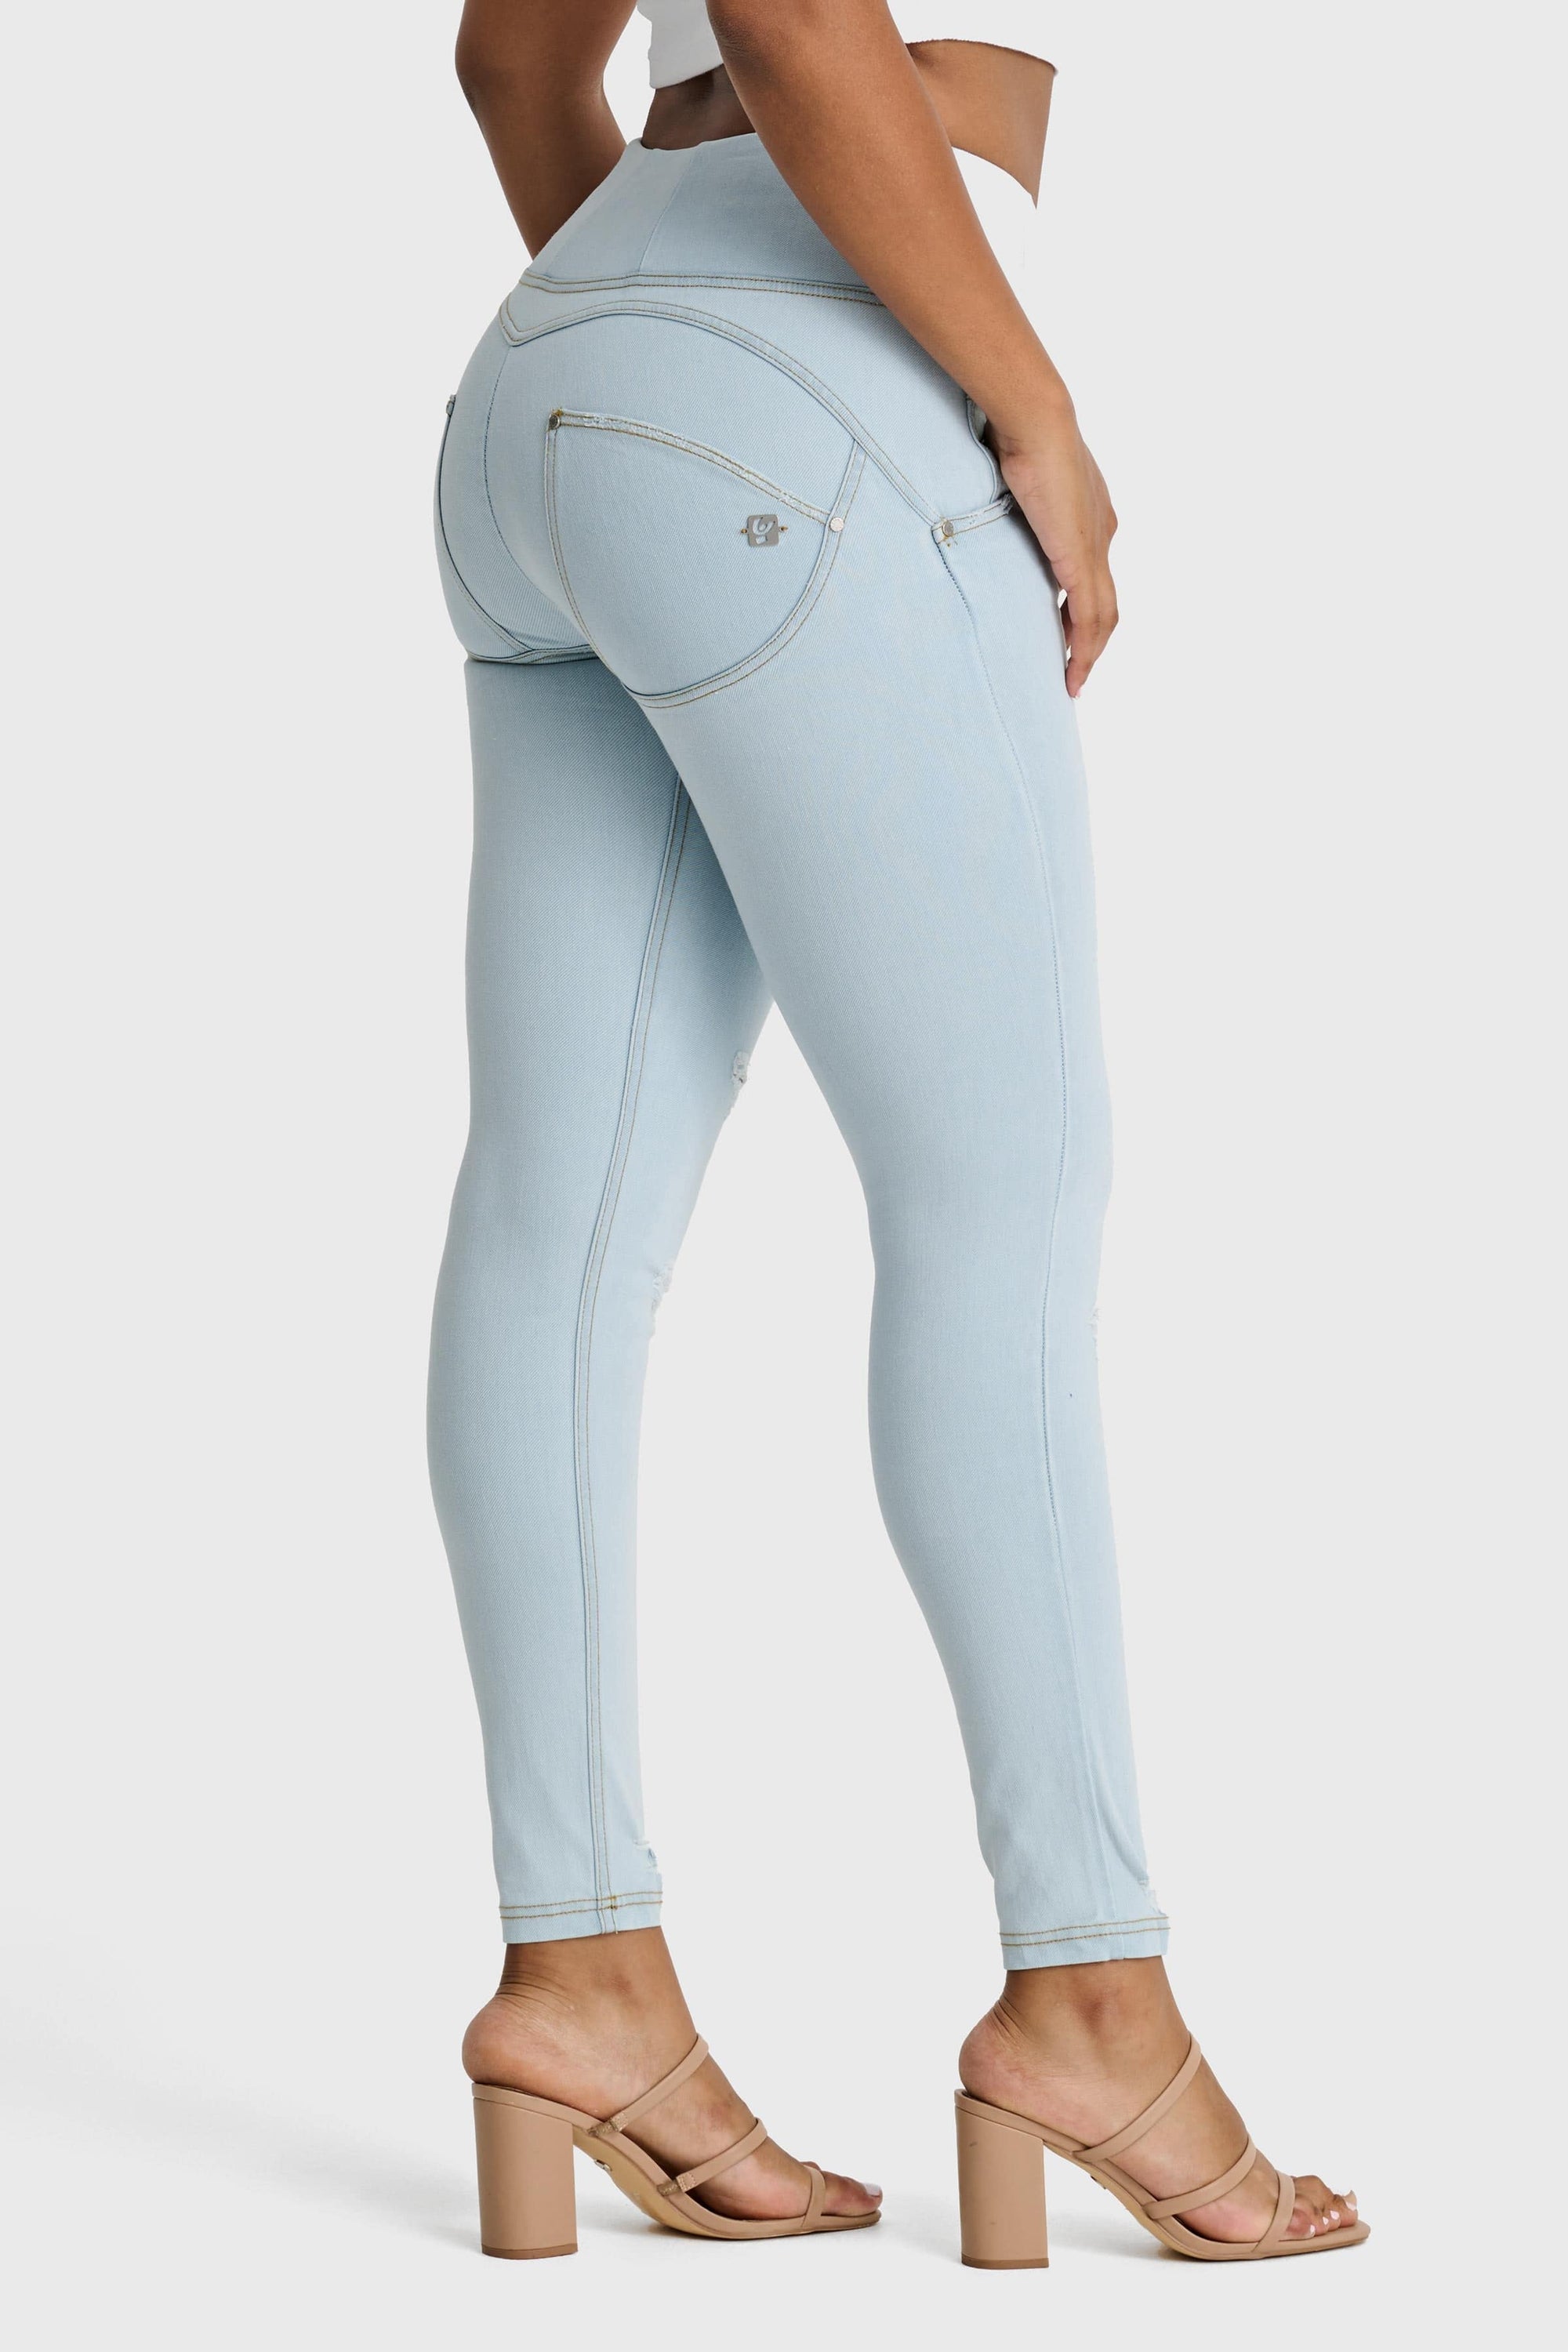 WR.UP® Snug Distressed Jeans - High Waisted - Full Length - Baby Blue + Yellow Stitching 7